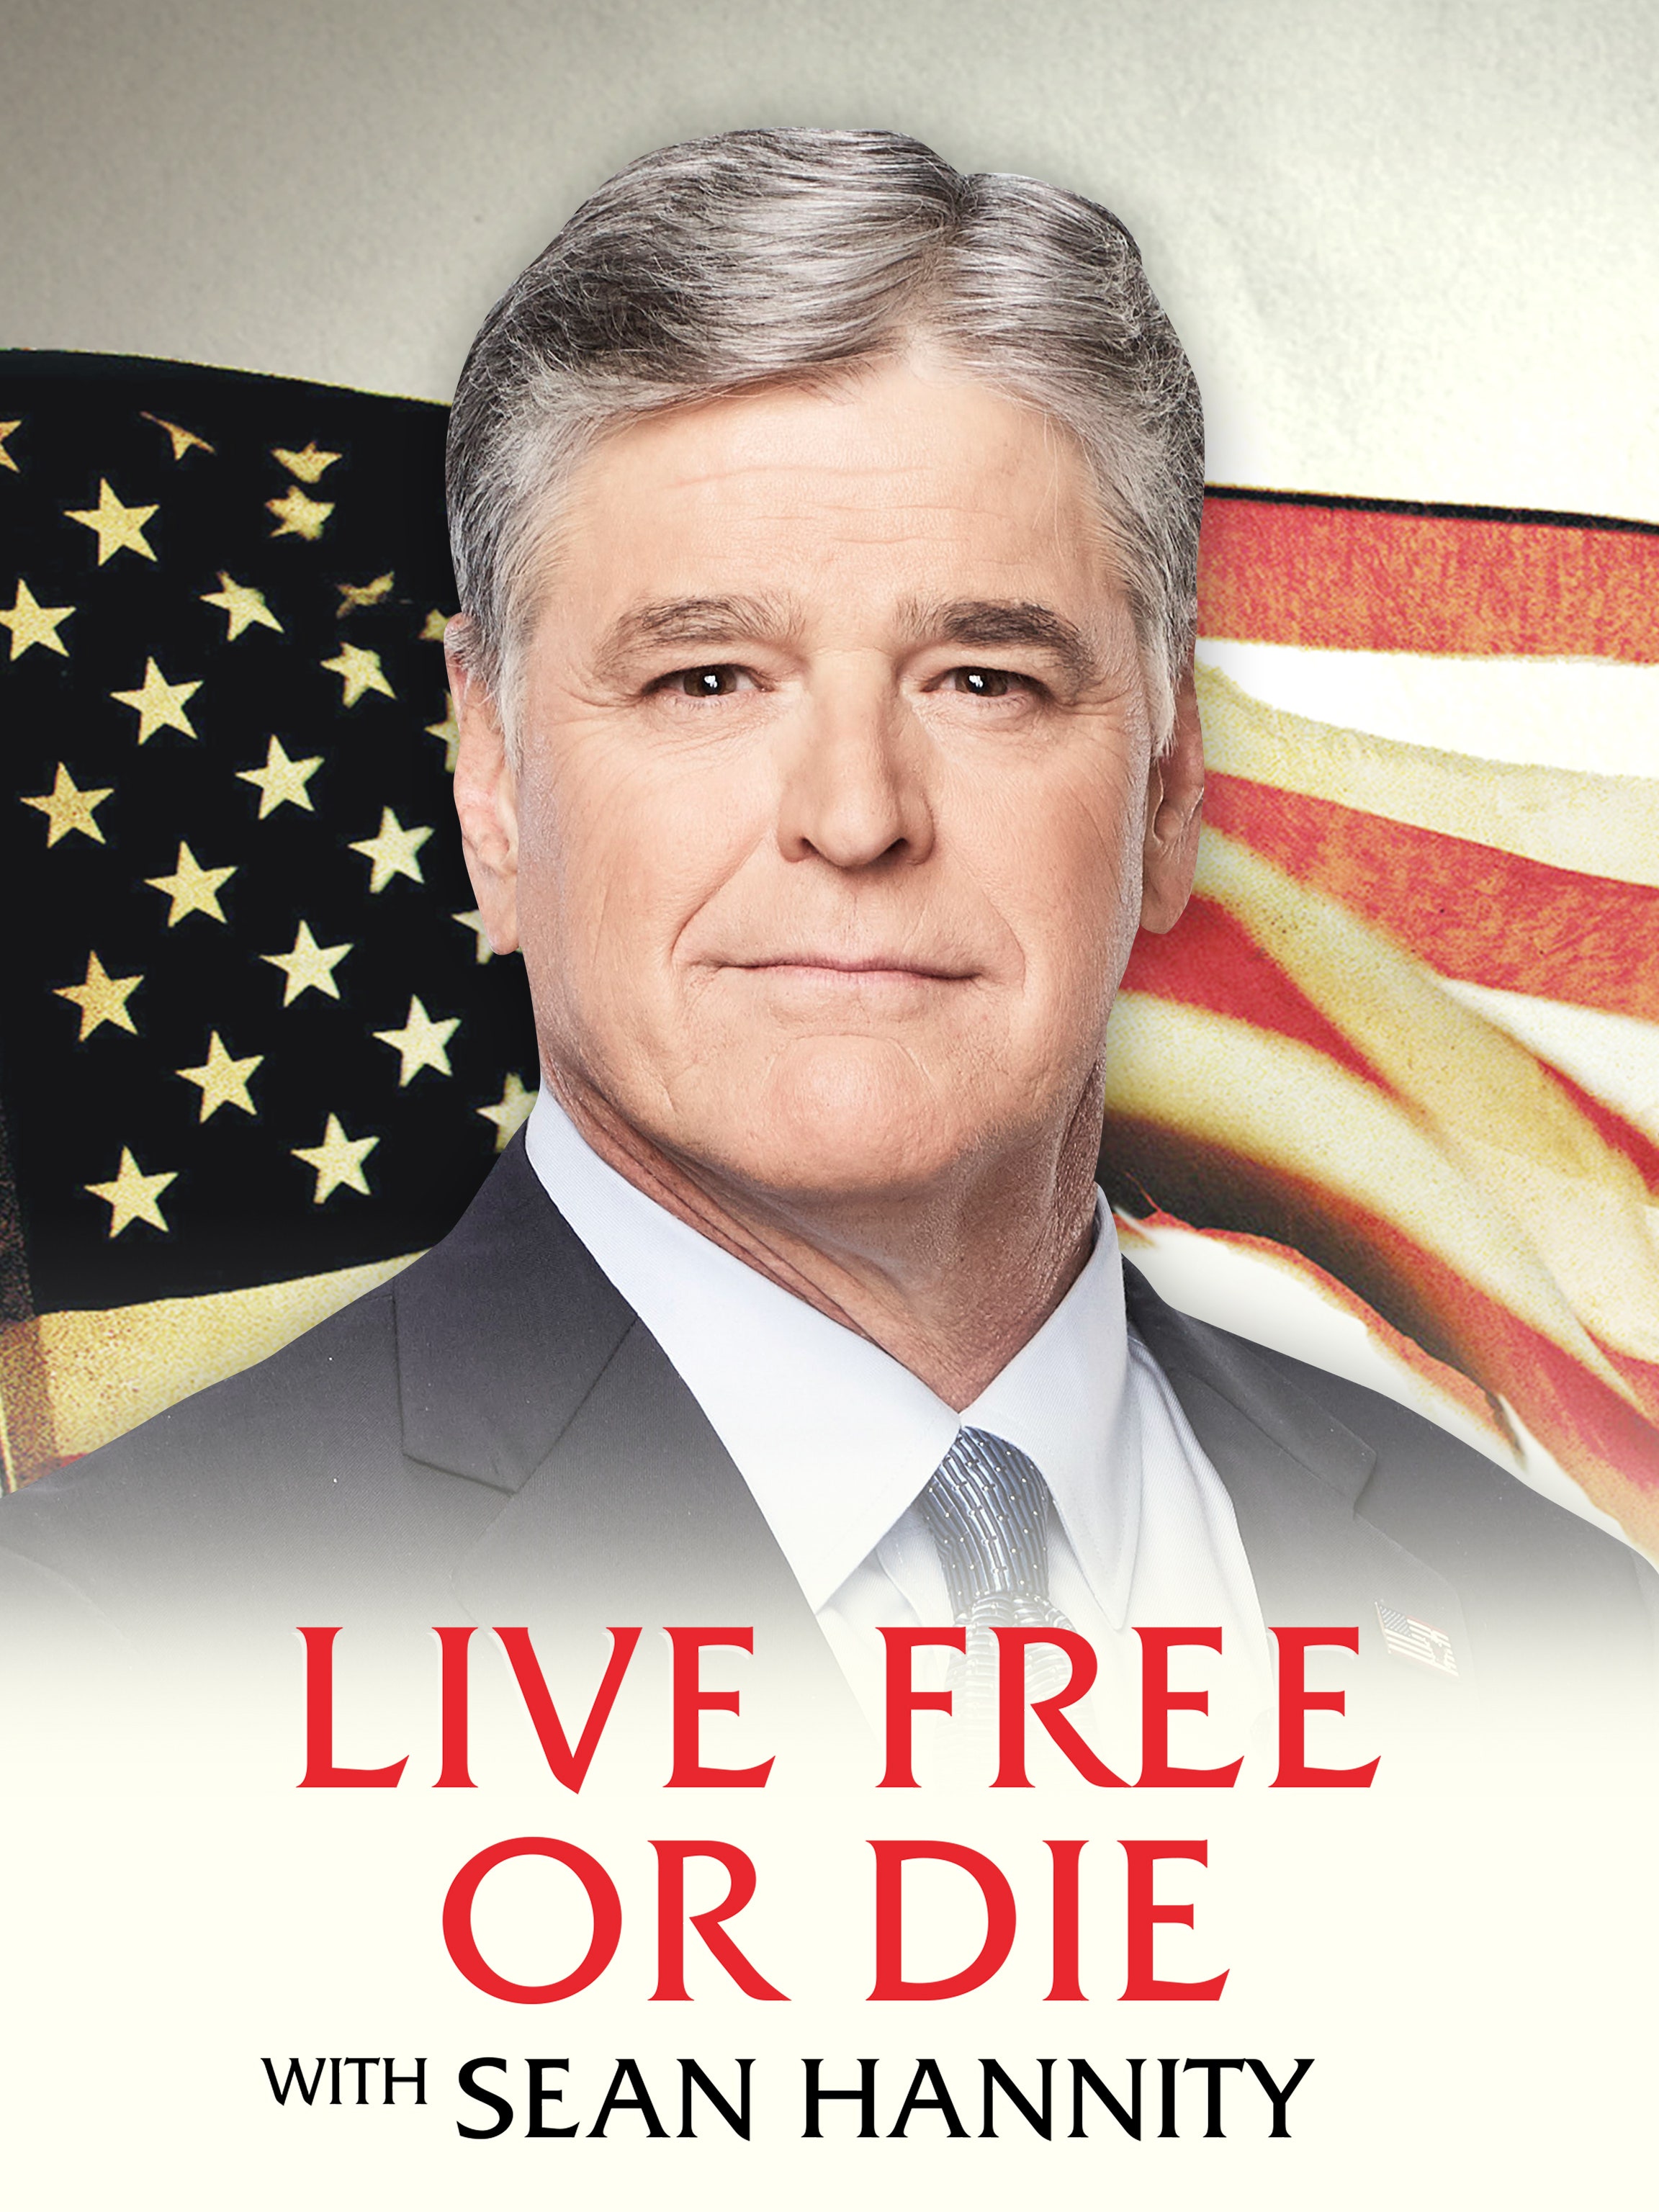 Live Free or Die with Sean Hannity dcg-mark-poster